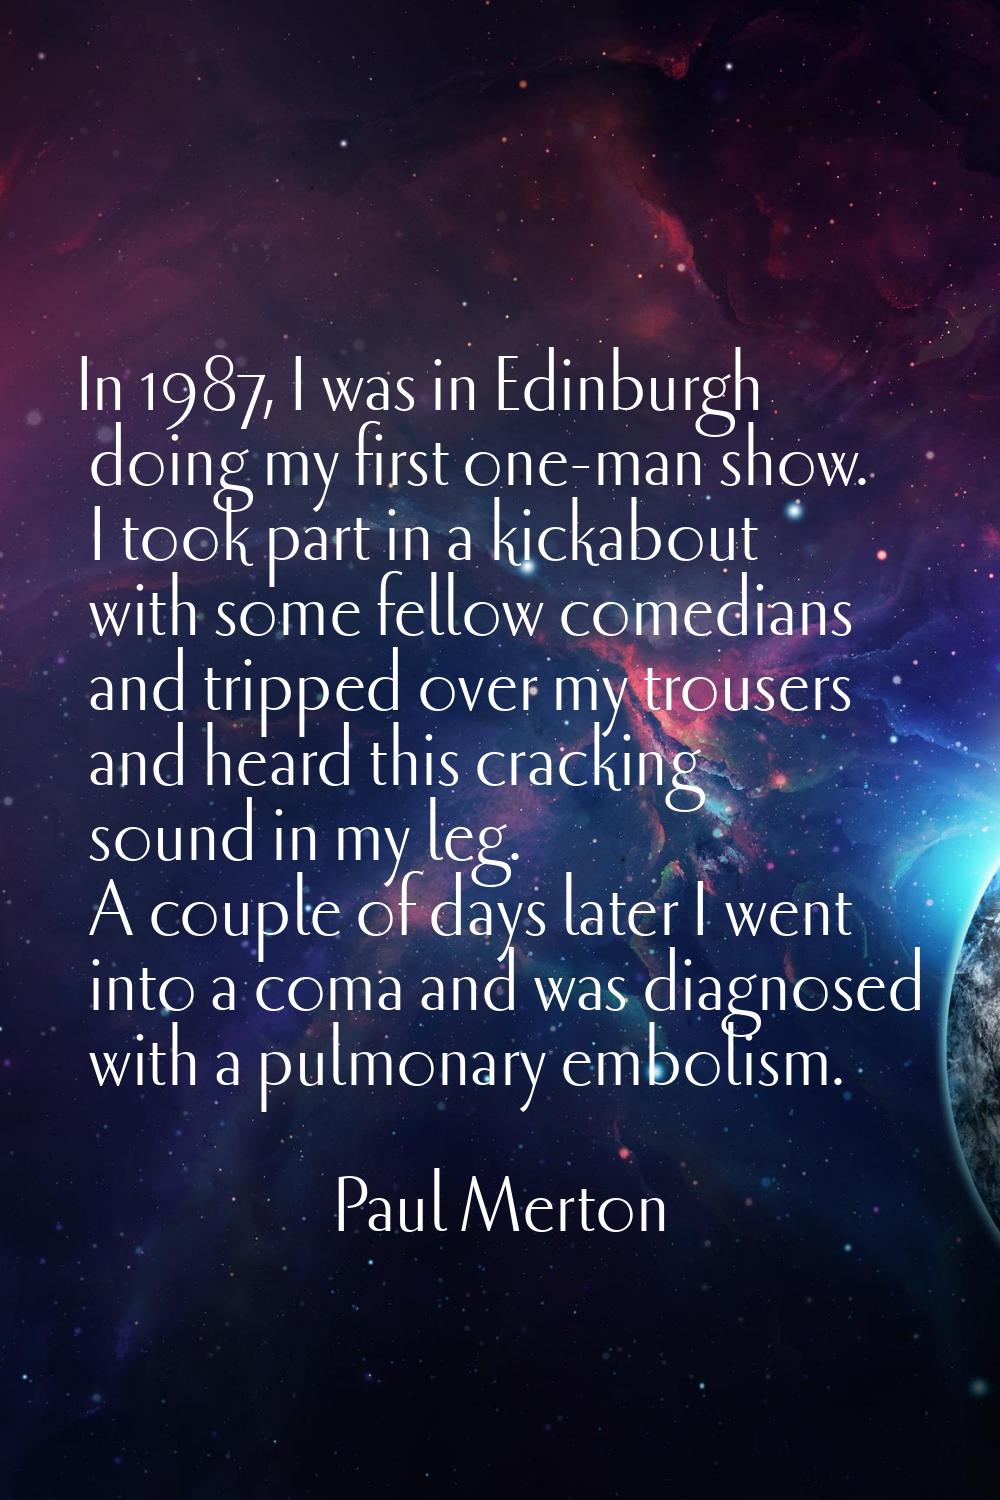 In 1987, I was in Edinburgh doing my first one-man show. I took part in a kickabout with some fello